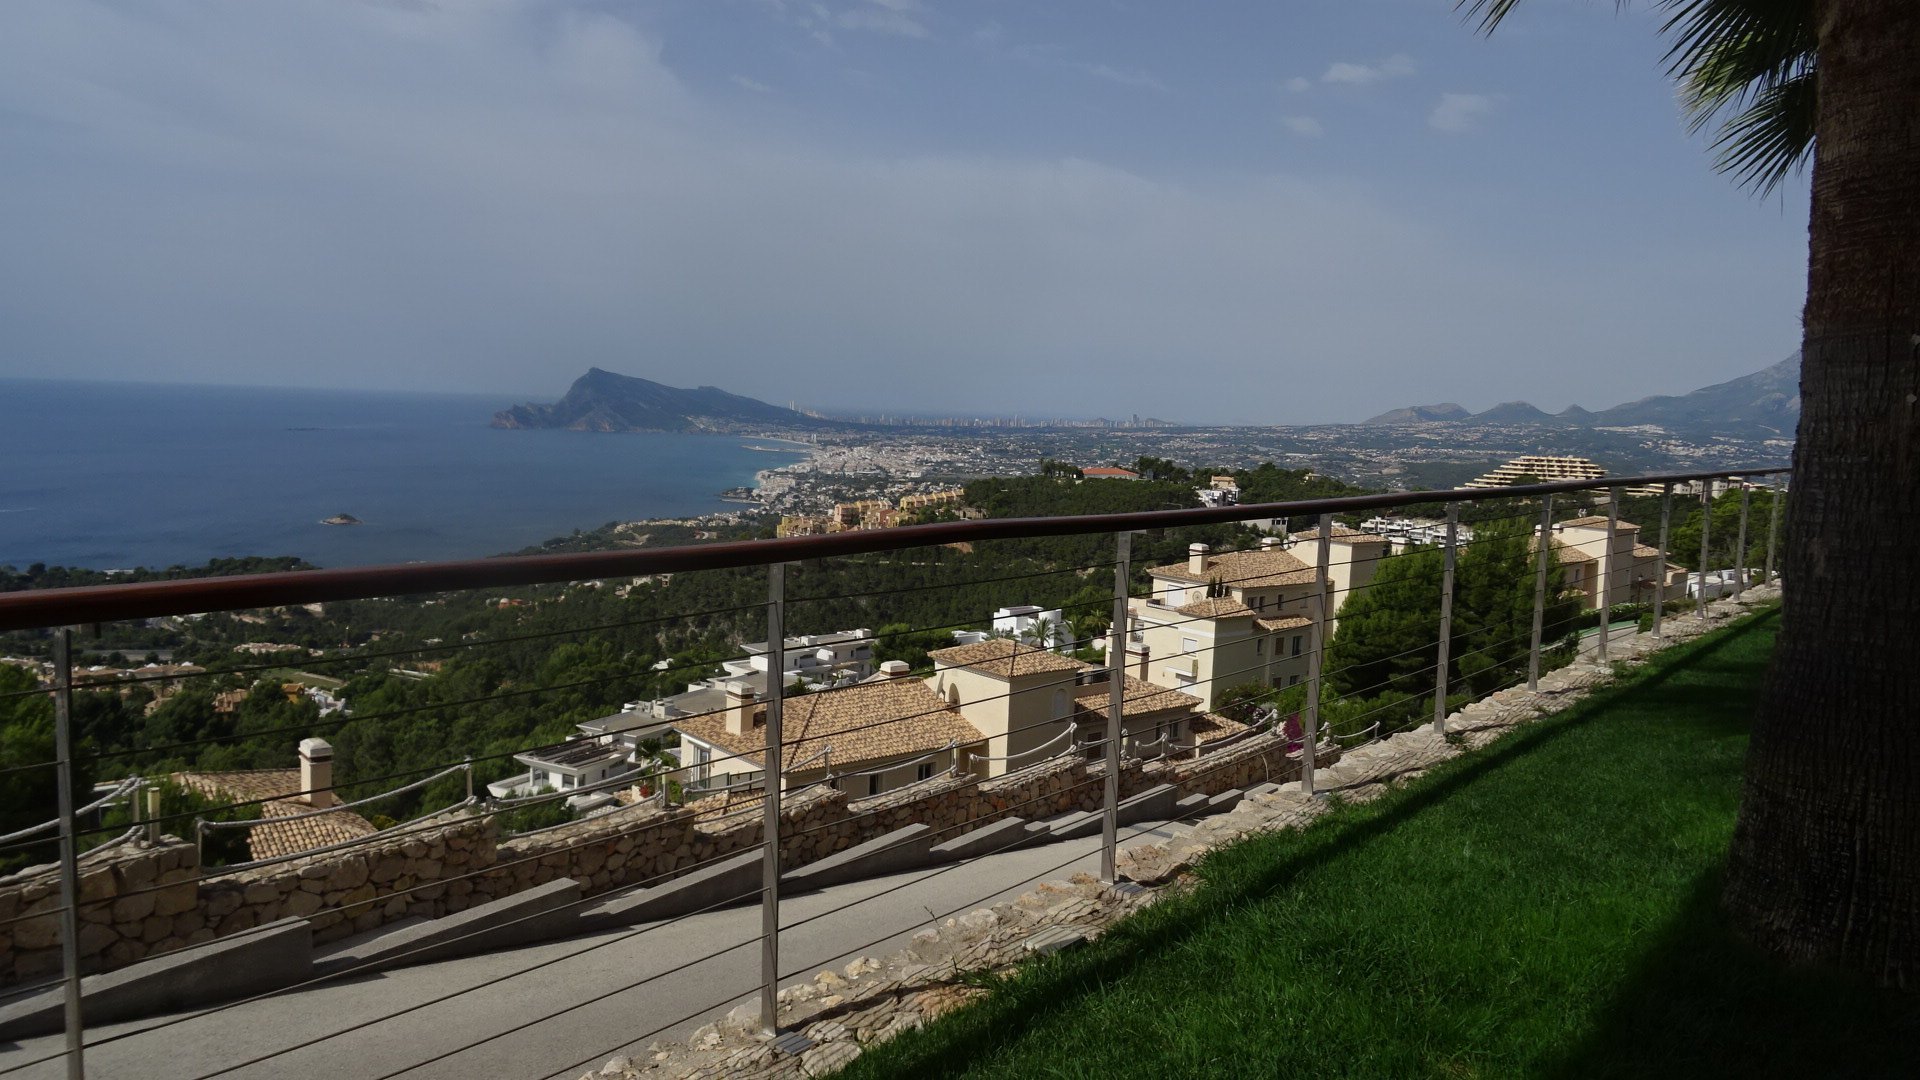 Huge luxury apartment with panoramic views over the Bay of Altea